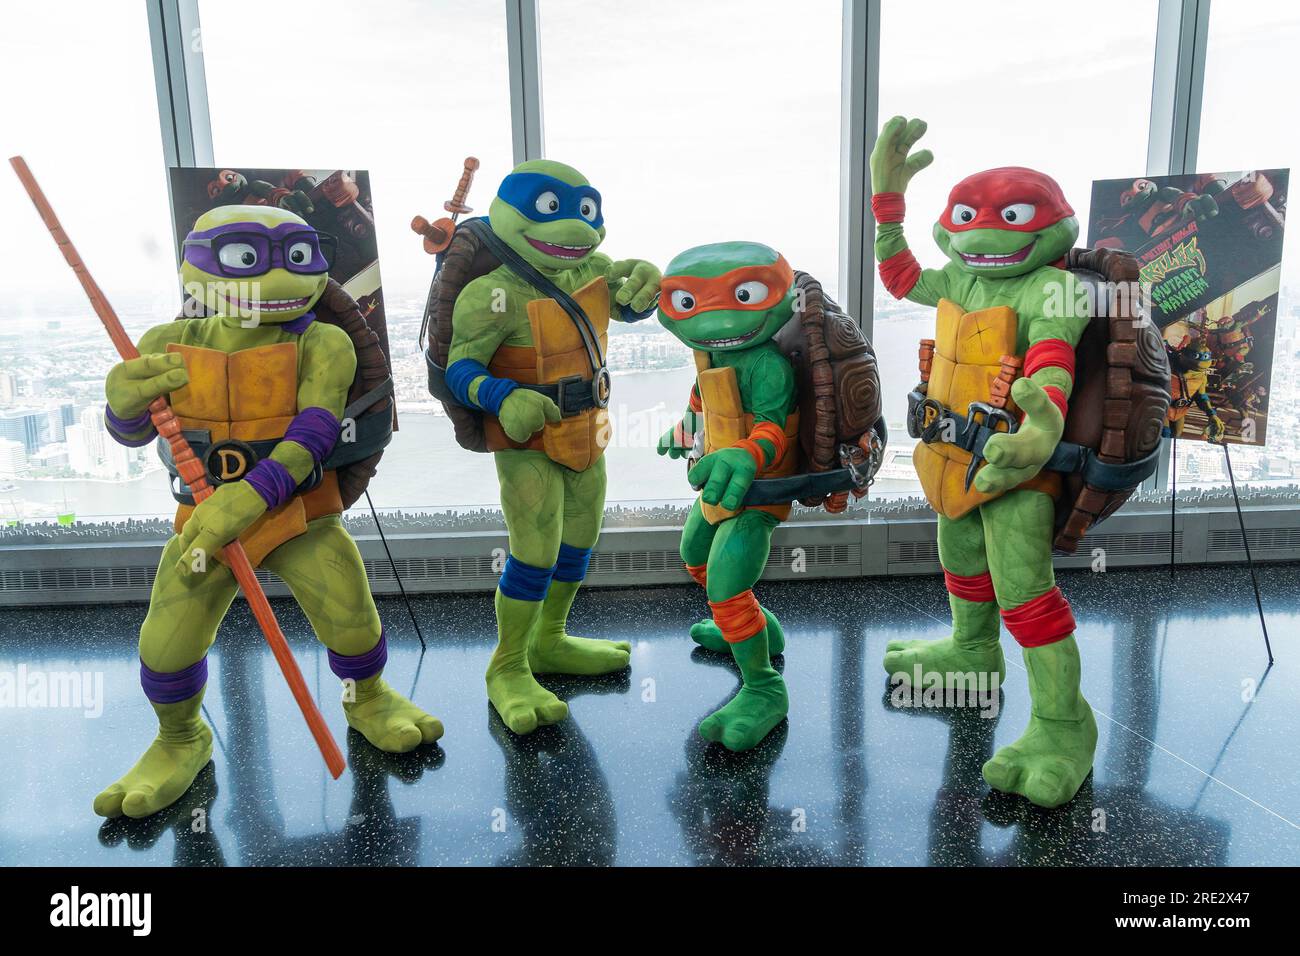 https://c8.alamy.com/comp/2RE2X47/new-york-usa-24th-july-2023-teenage-mutant-ninja-turtles-characters-visit-one-world-observatory-in-new-york-on-july-24-2023-and-pose-with-visitors-in-anticipation-of-release-of-teenage-mutant-ninja-turtles-mutant-mayhem-blockbuster-movie-is-scheduled-for-release-on-august-2-2023-photo-by-lev-radinsipa-usa-credit-sipa-usaalamy-live-news-2RE2X47.jpg